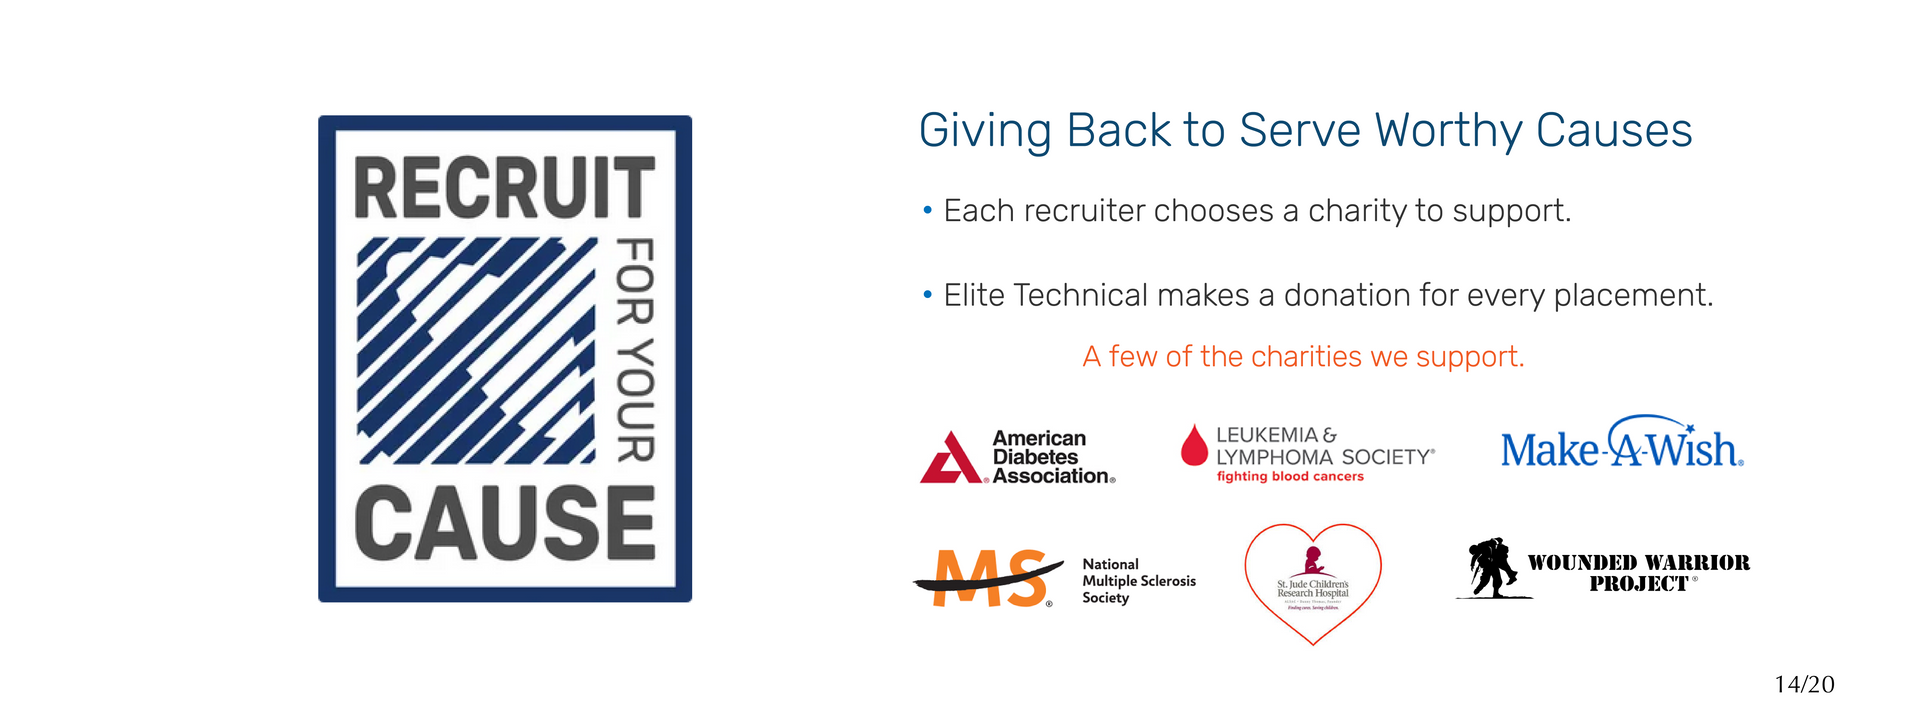 Elite Technical's Recruit for Your Cause Giving Campaign